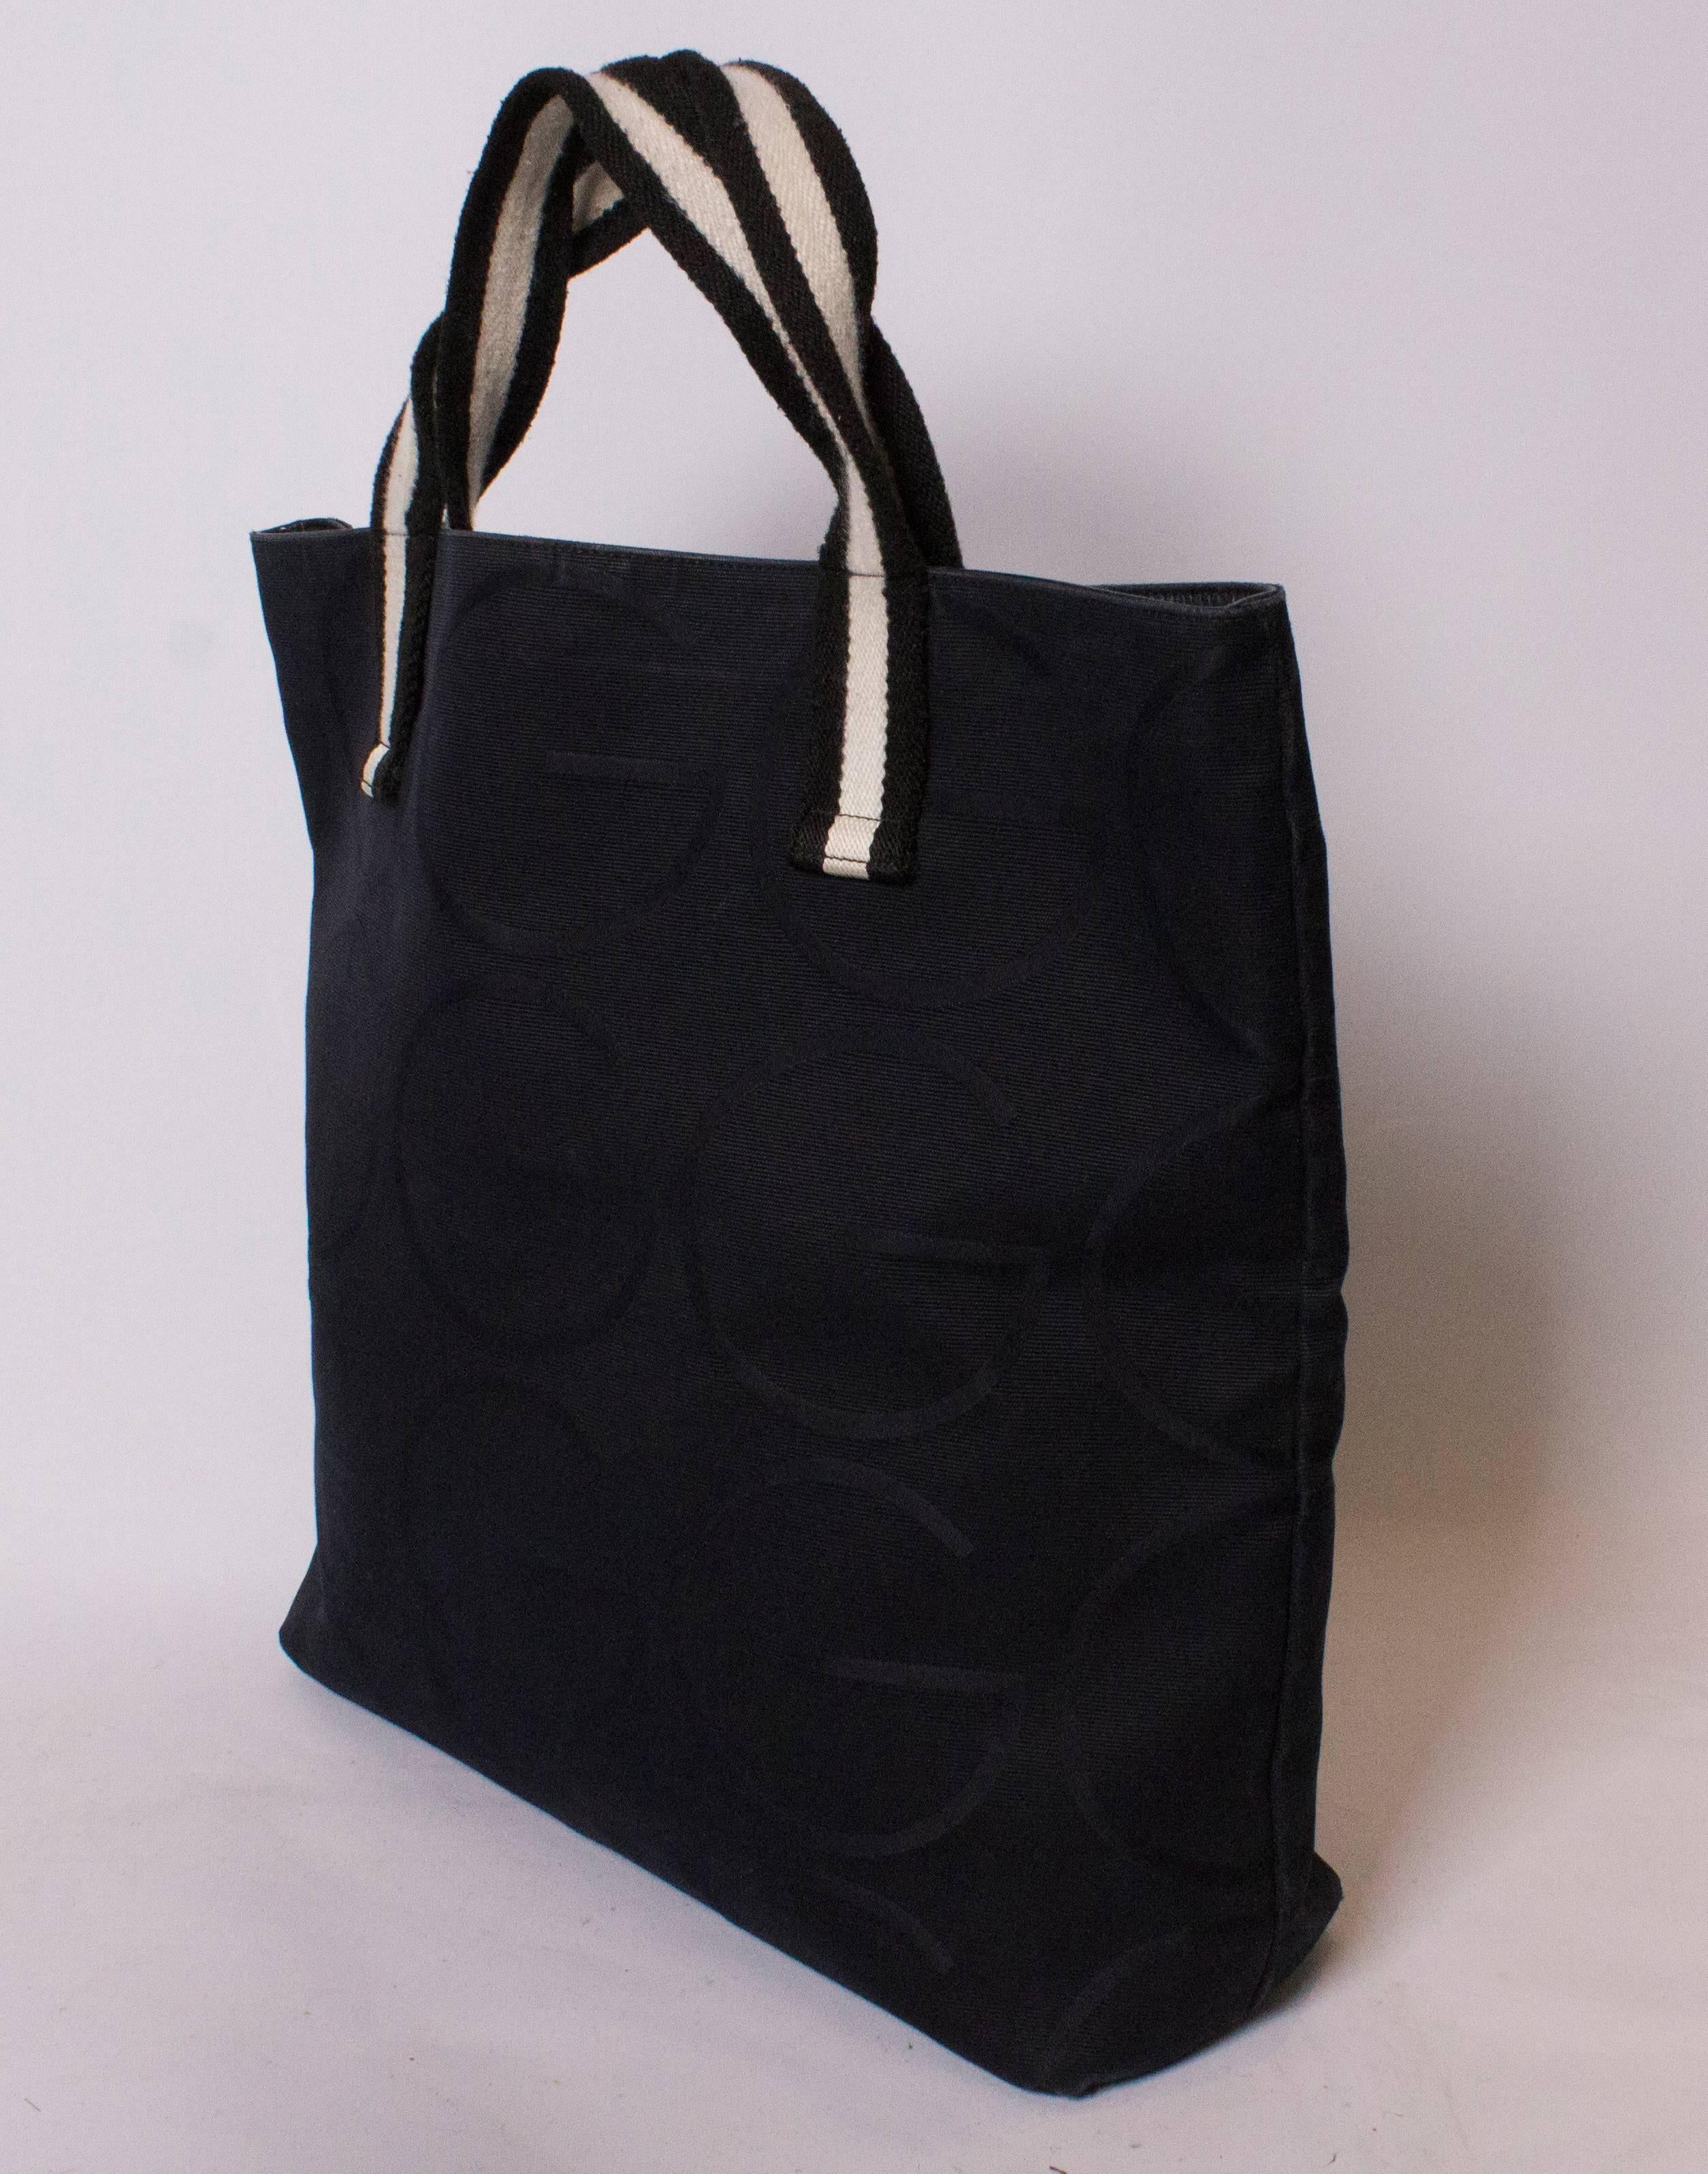 A black Gucci shopper, with black and white handles. The black fabric has the letter G woven in, and the serial number is 128 439/002058.There is an internal pouch pocket, and the measurements are: Base 15 1/2'' x 4'', and height 16''.